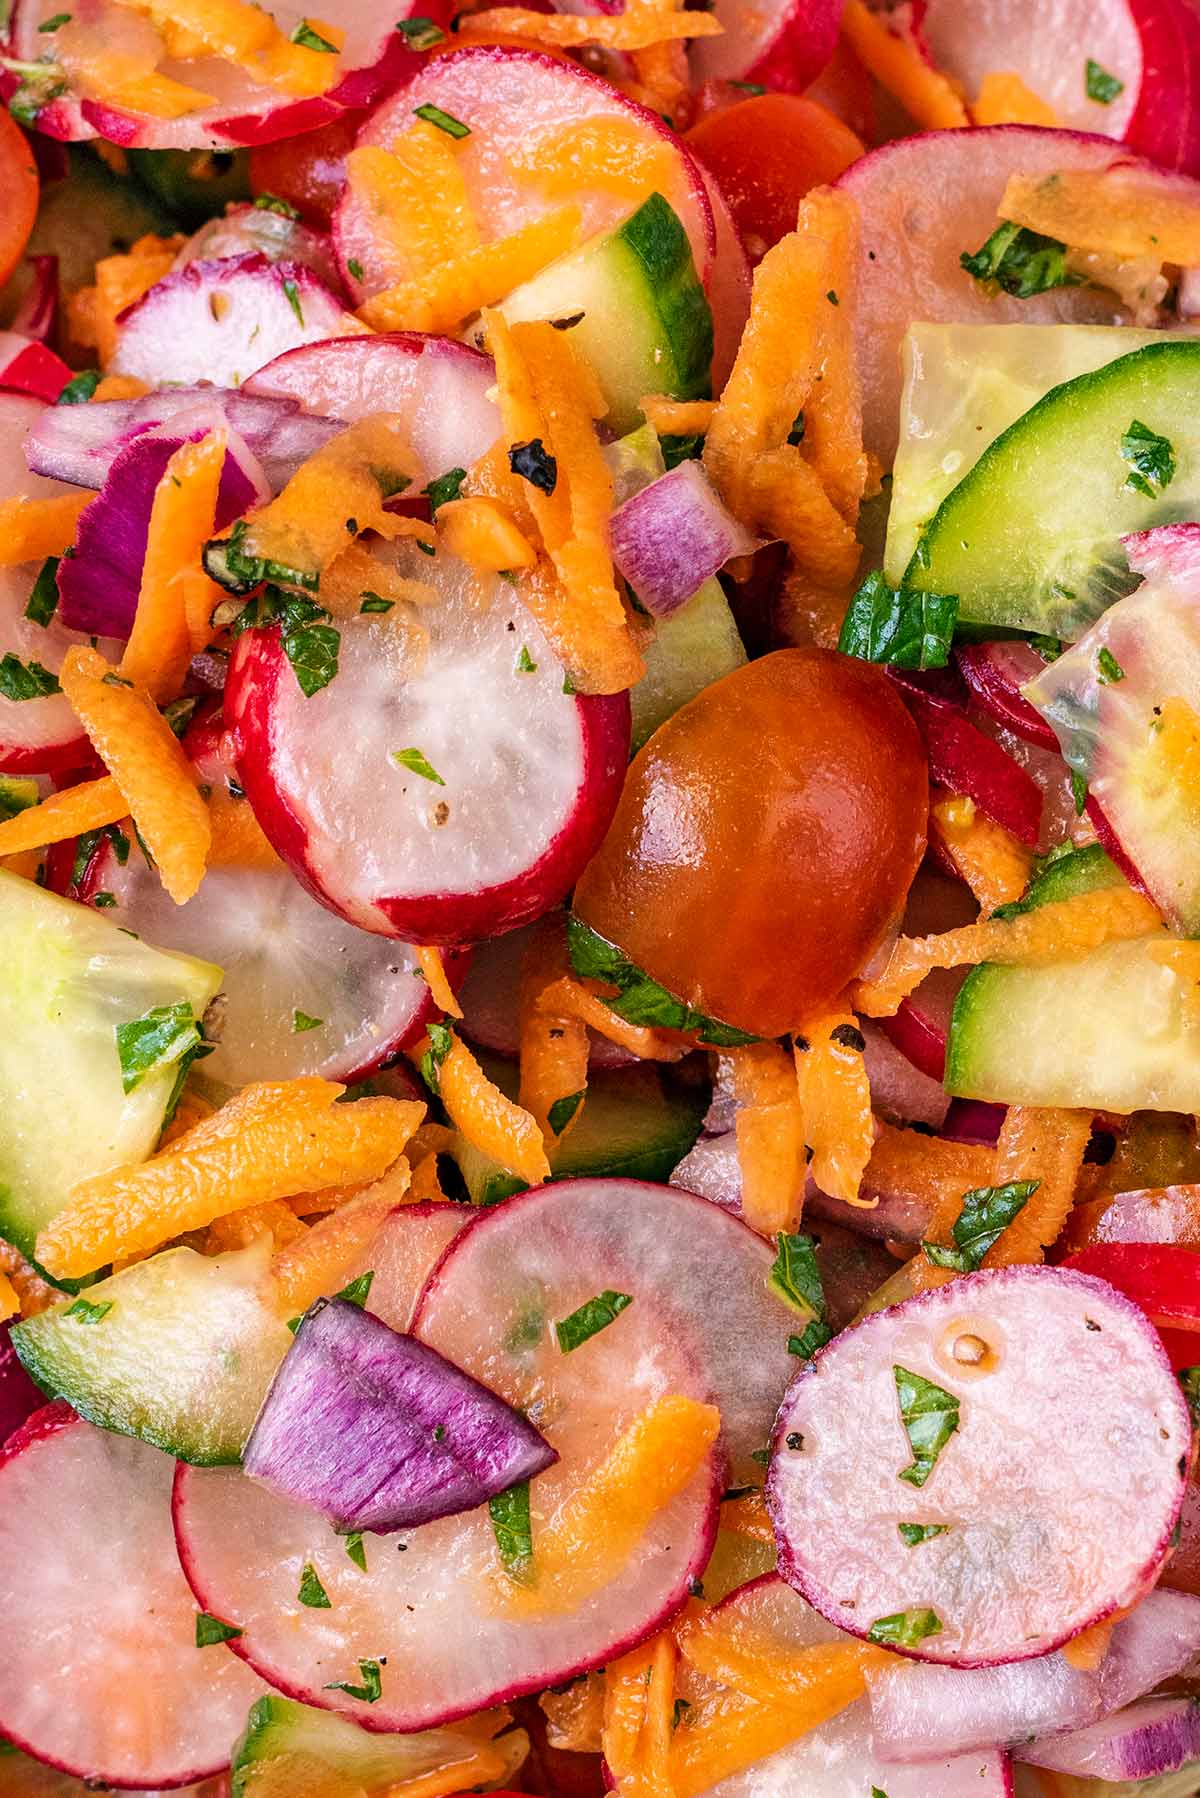 Sliced radishes, chopped cucumber, tomatoes and grated carrot all mixed together.